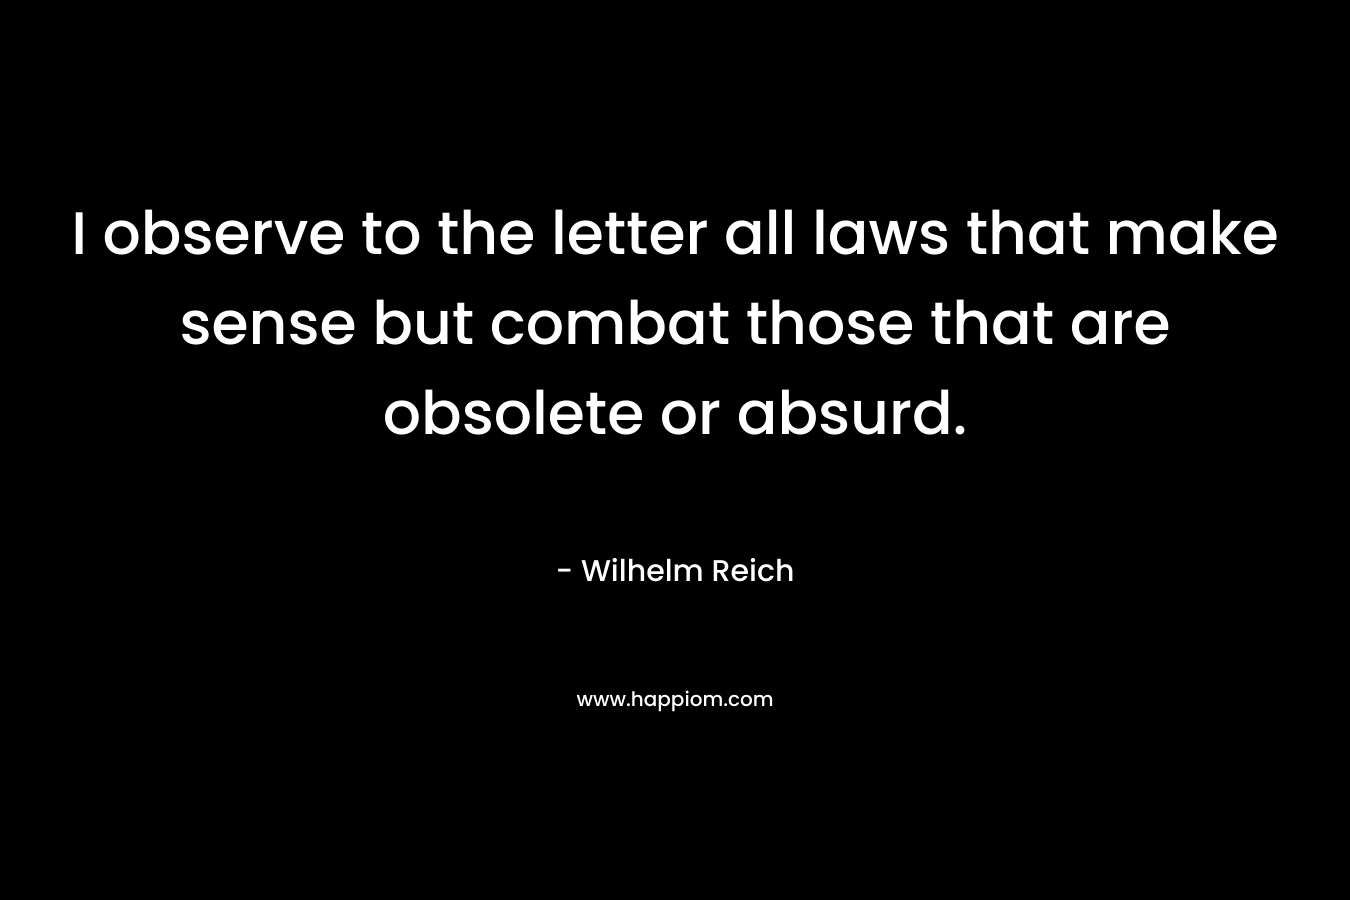 I observe to the letter all laws that make sense but combat those that are obsolete or absurd. – Wilhelm Reich